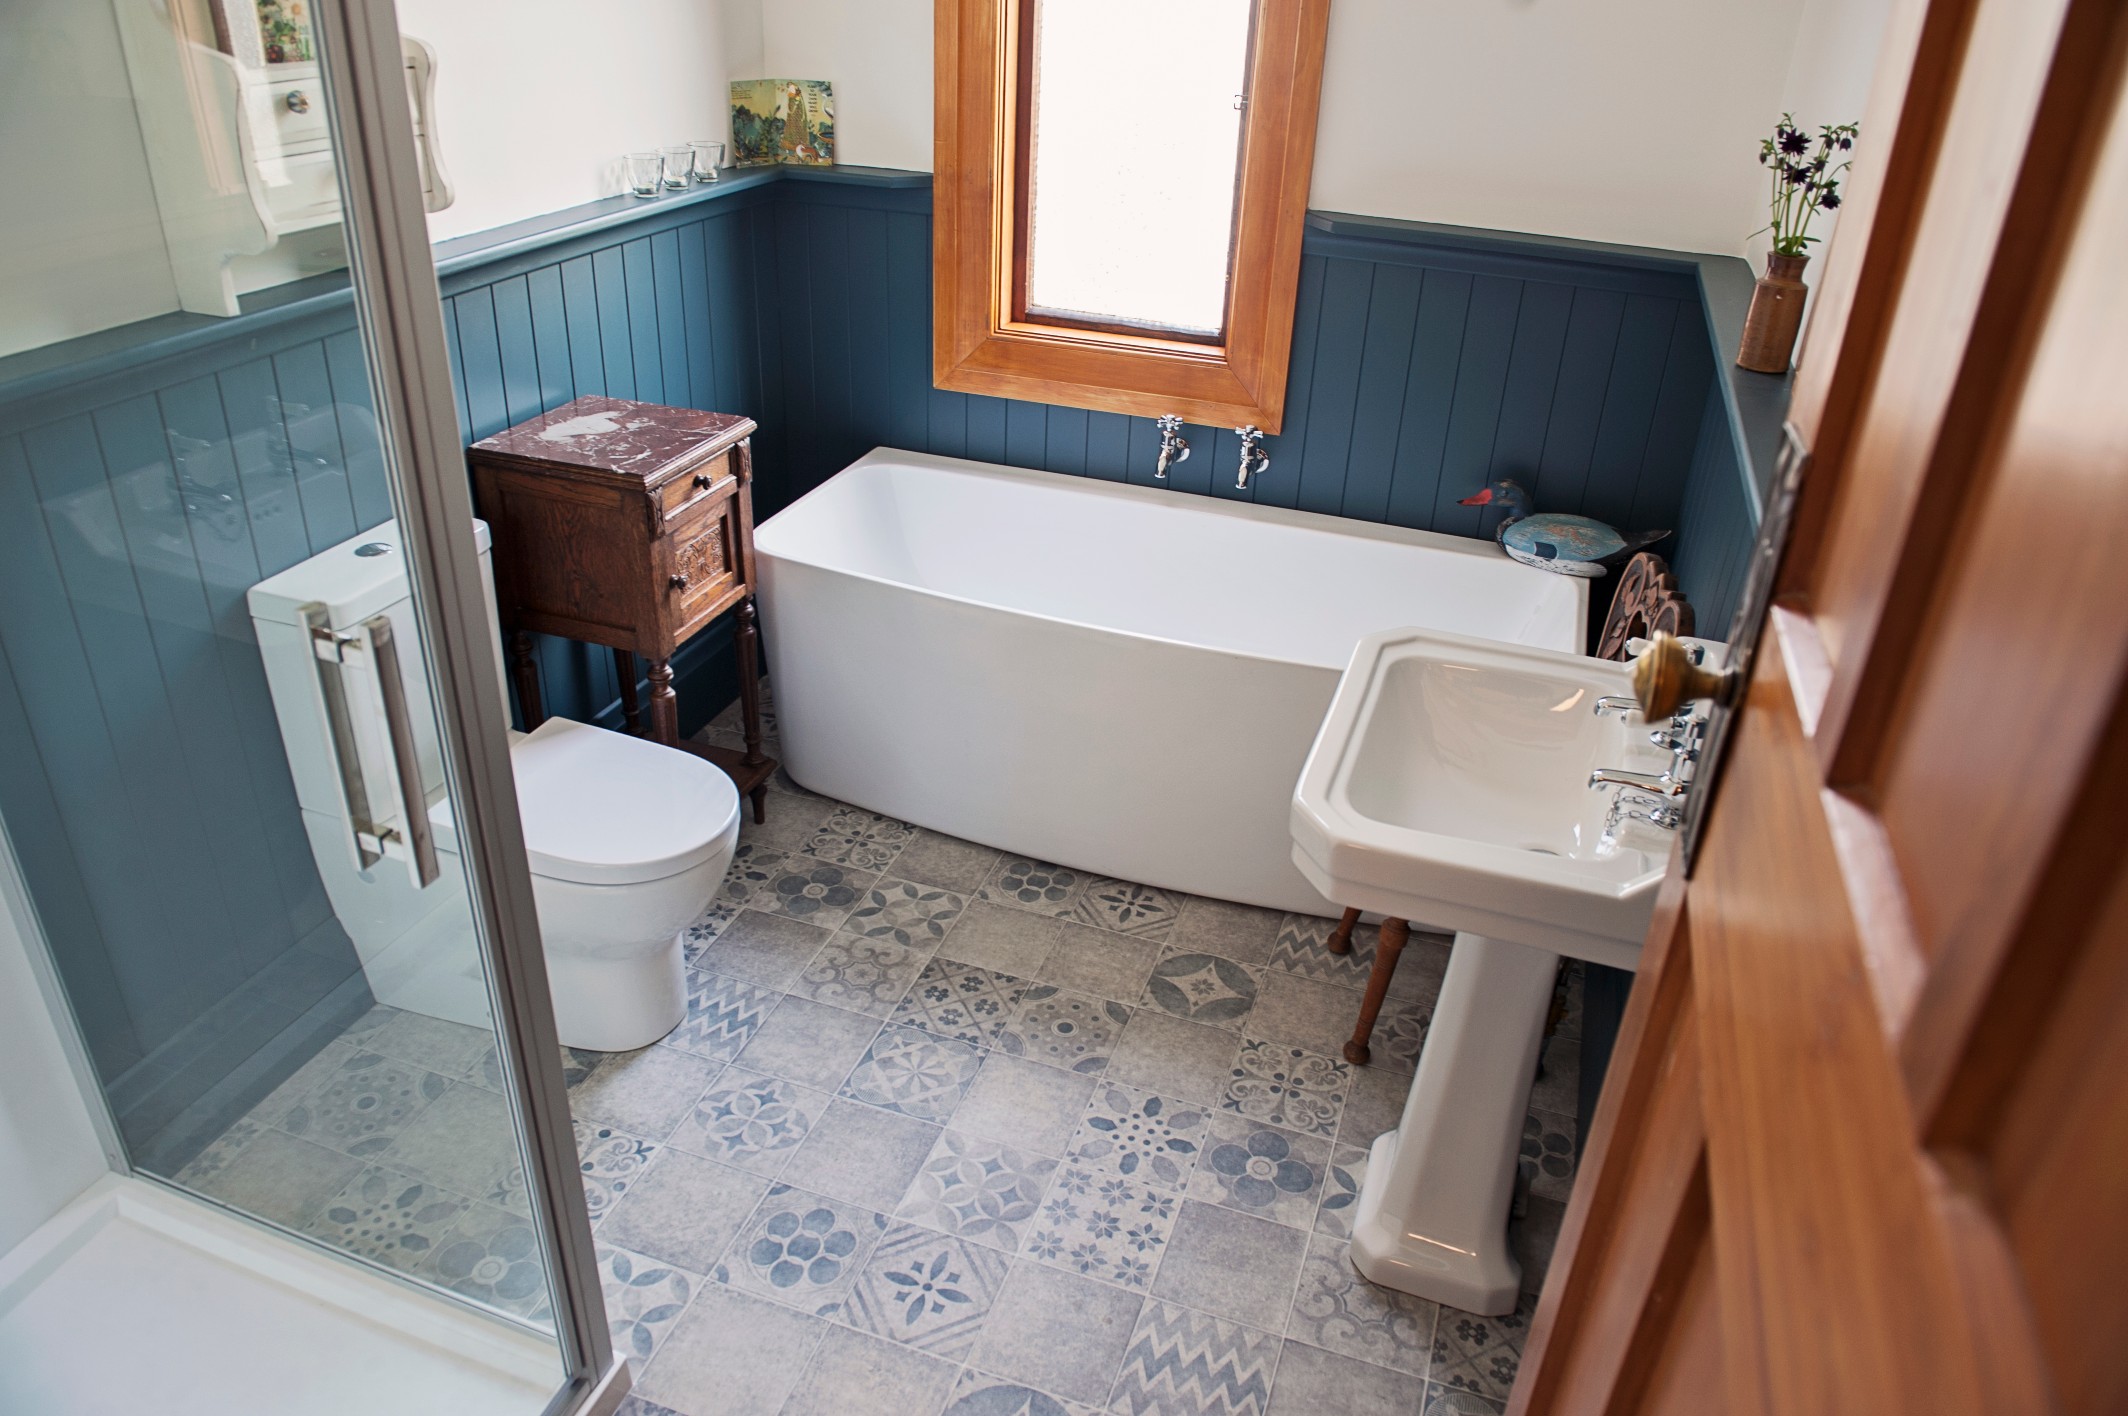  This remodeled bathroom, has "tile look" vinyl to add authenticity.